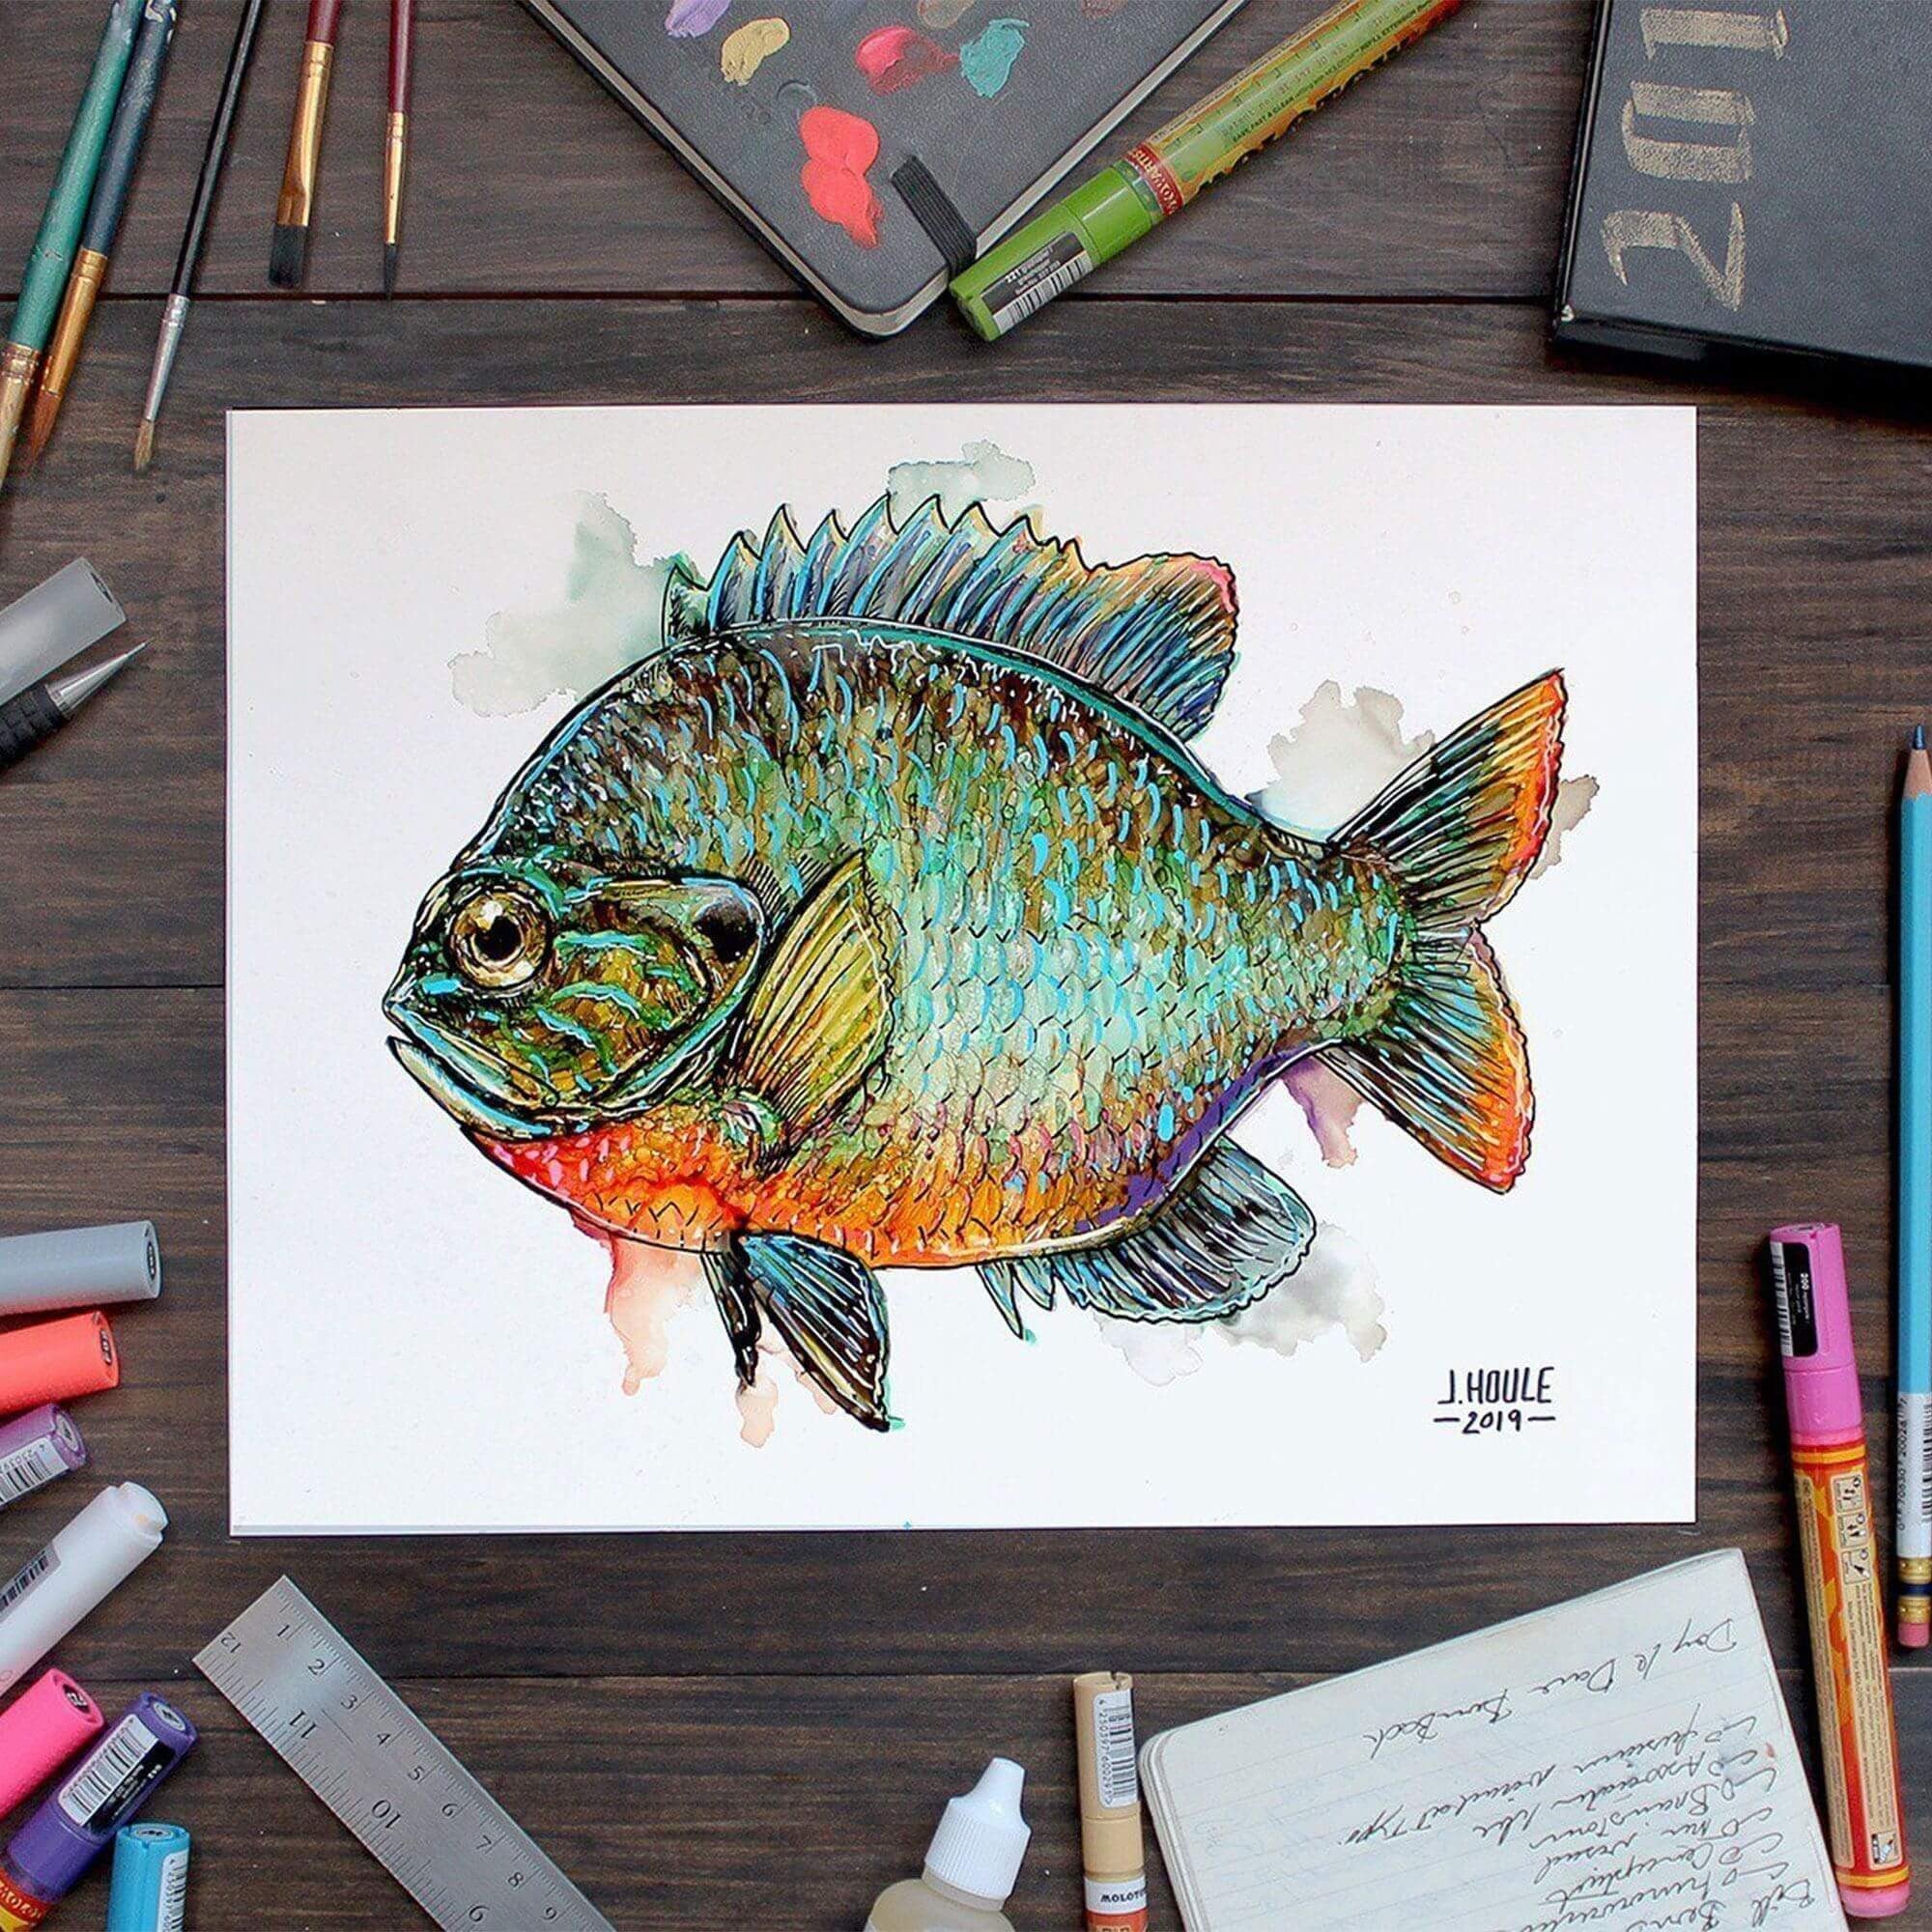 Drawing technique with markers by Justin Houle